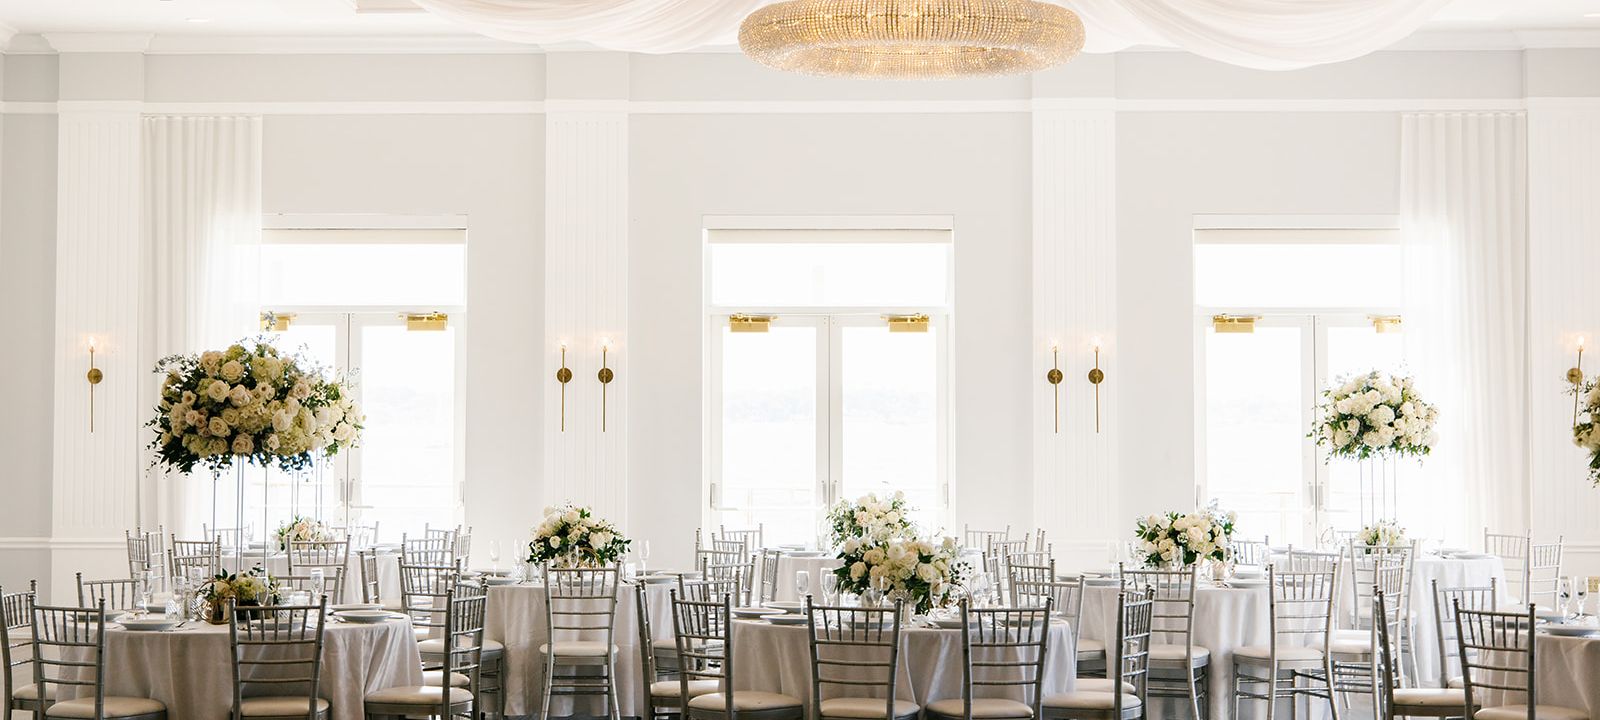 A bright and airy wedding venue decorated for a banquet.